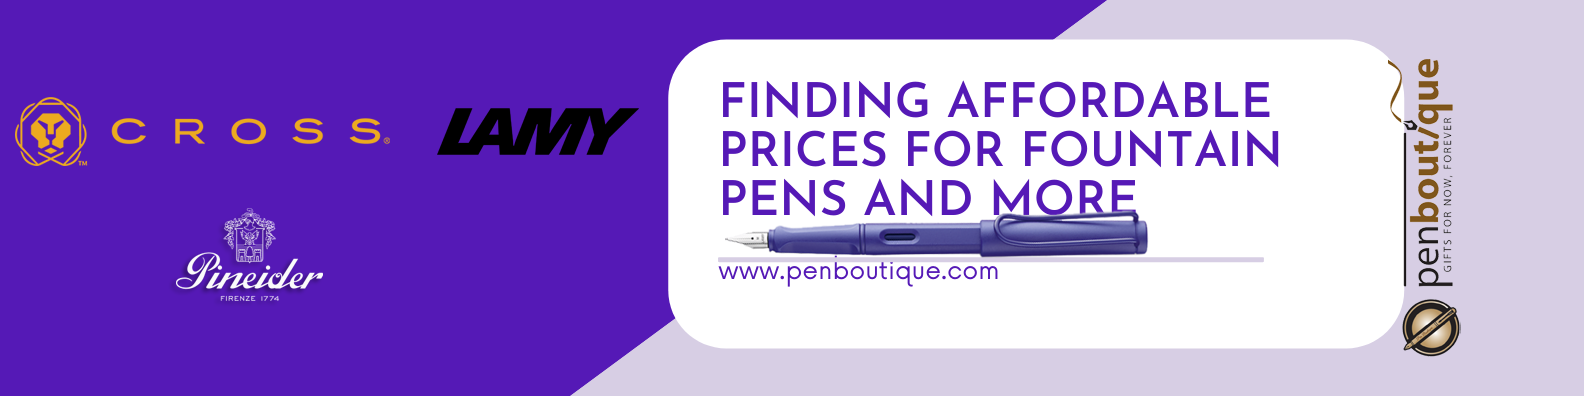 Finding Affordable Prices for Fountain Pens and More